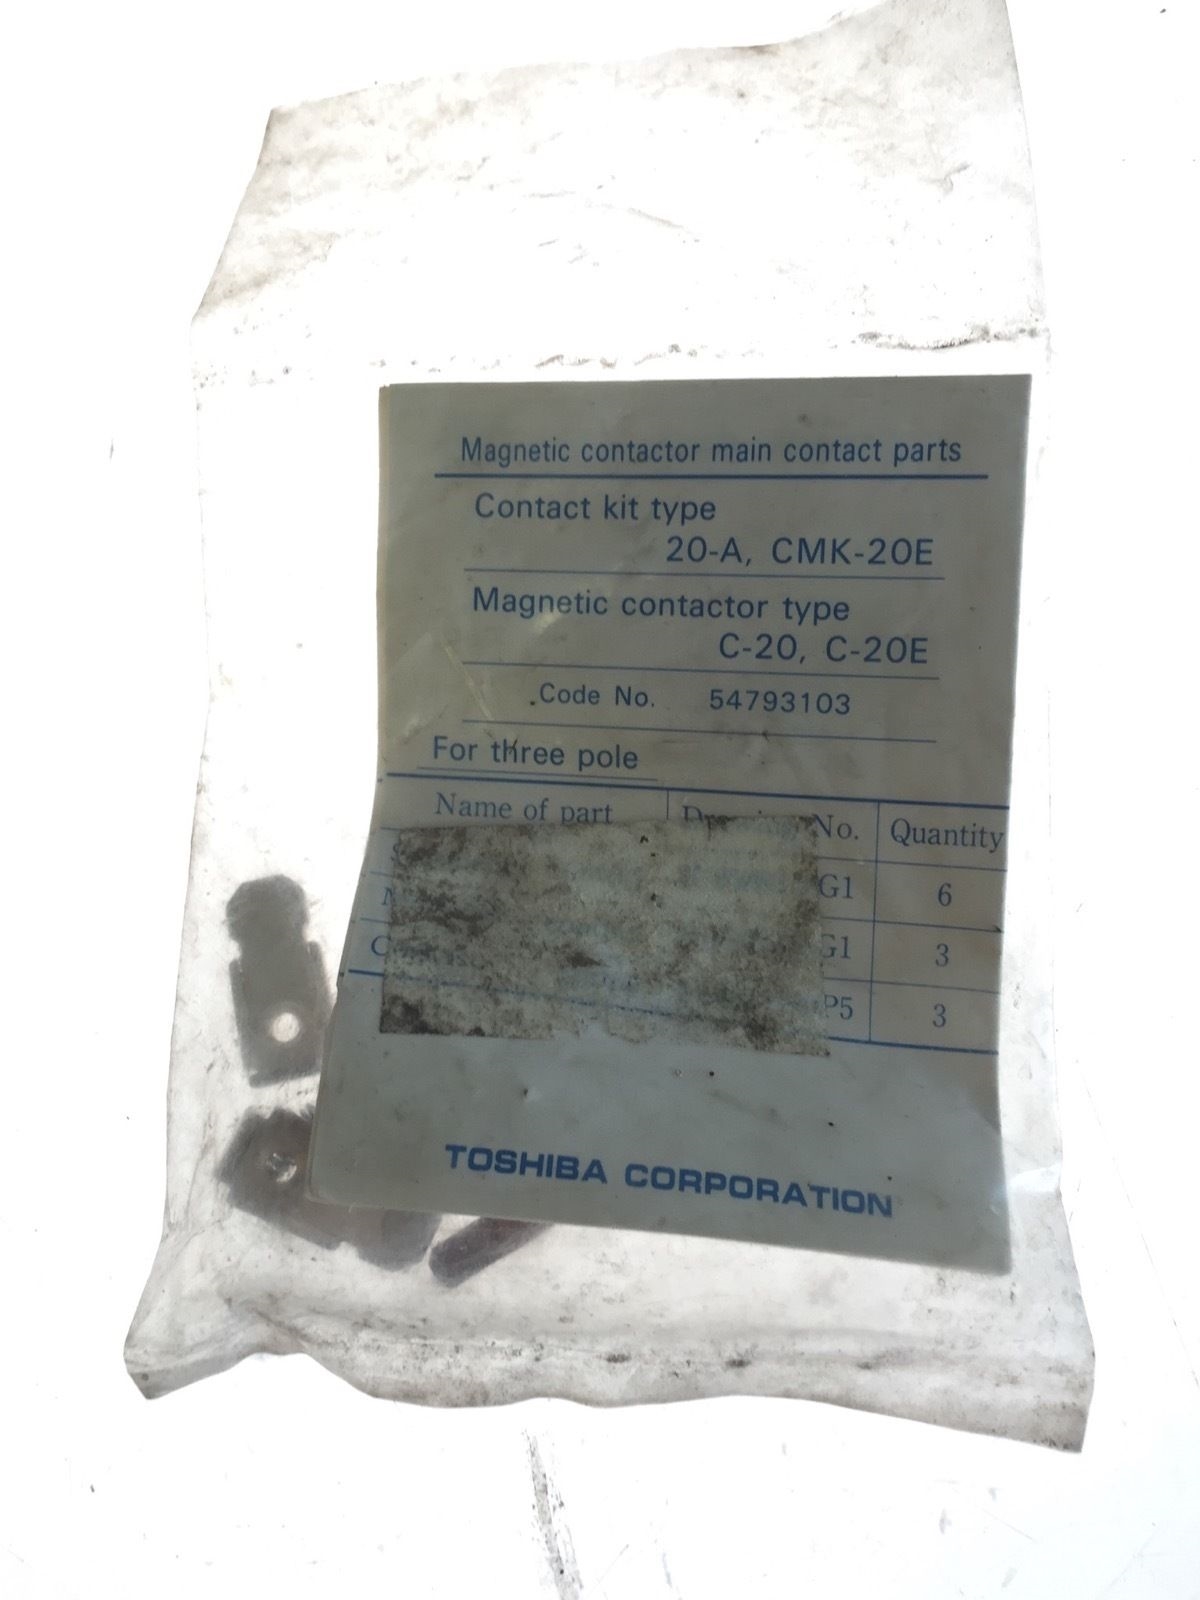 NEW IN BAG Toshiba Magnetic Contactor Kit 20-A CMK-20E C-20 C20A C-20E (H87) 1